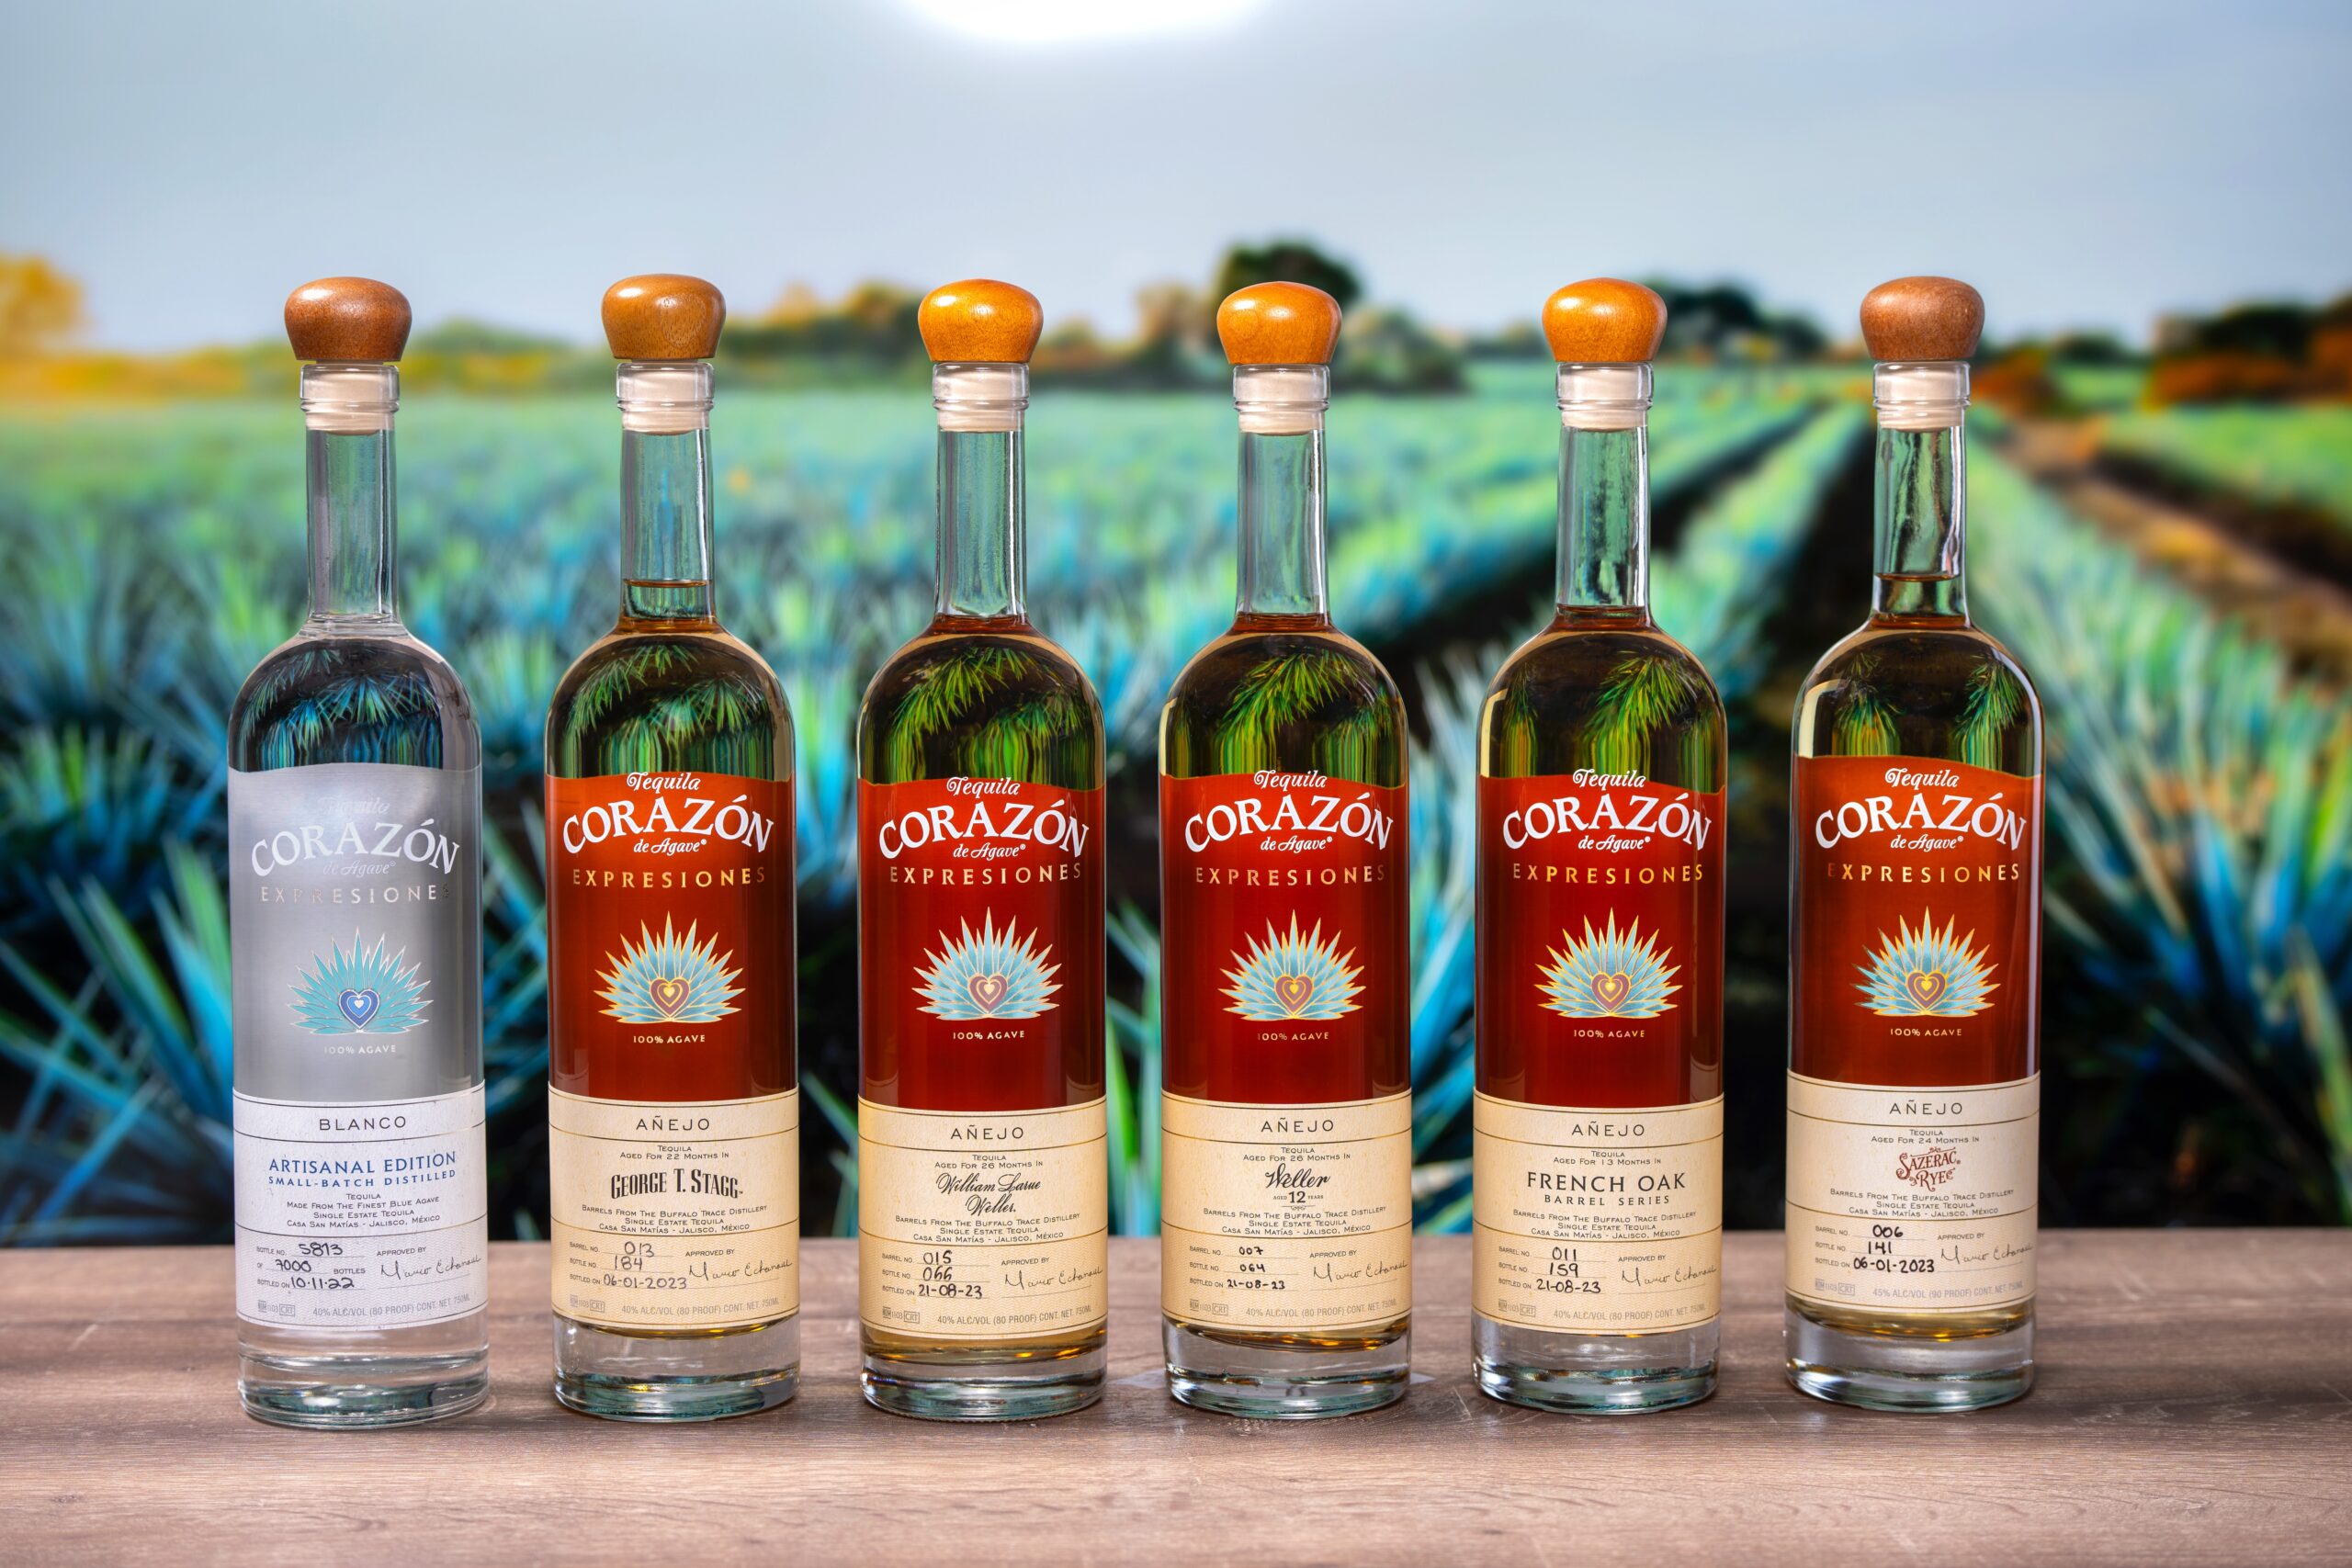 Corazón Teams Up with Buffalo Trace Distillery for Limited Release Tequila Collection